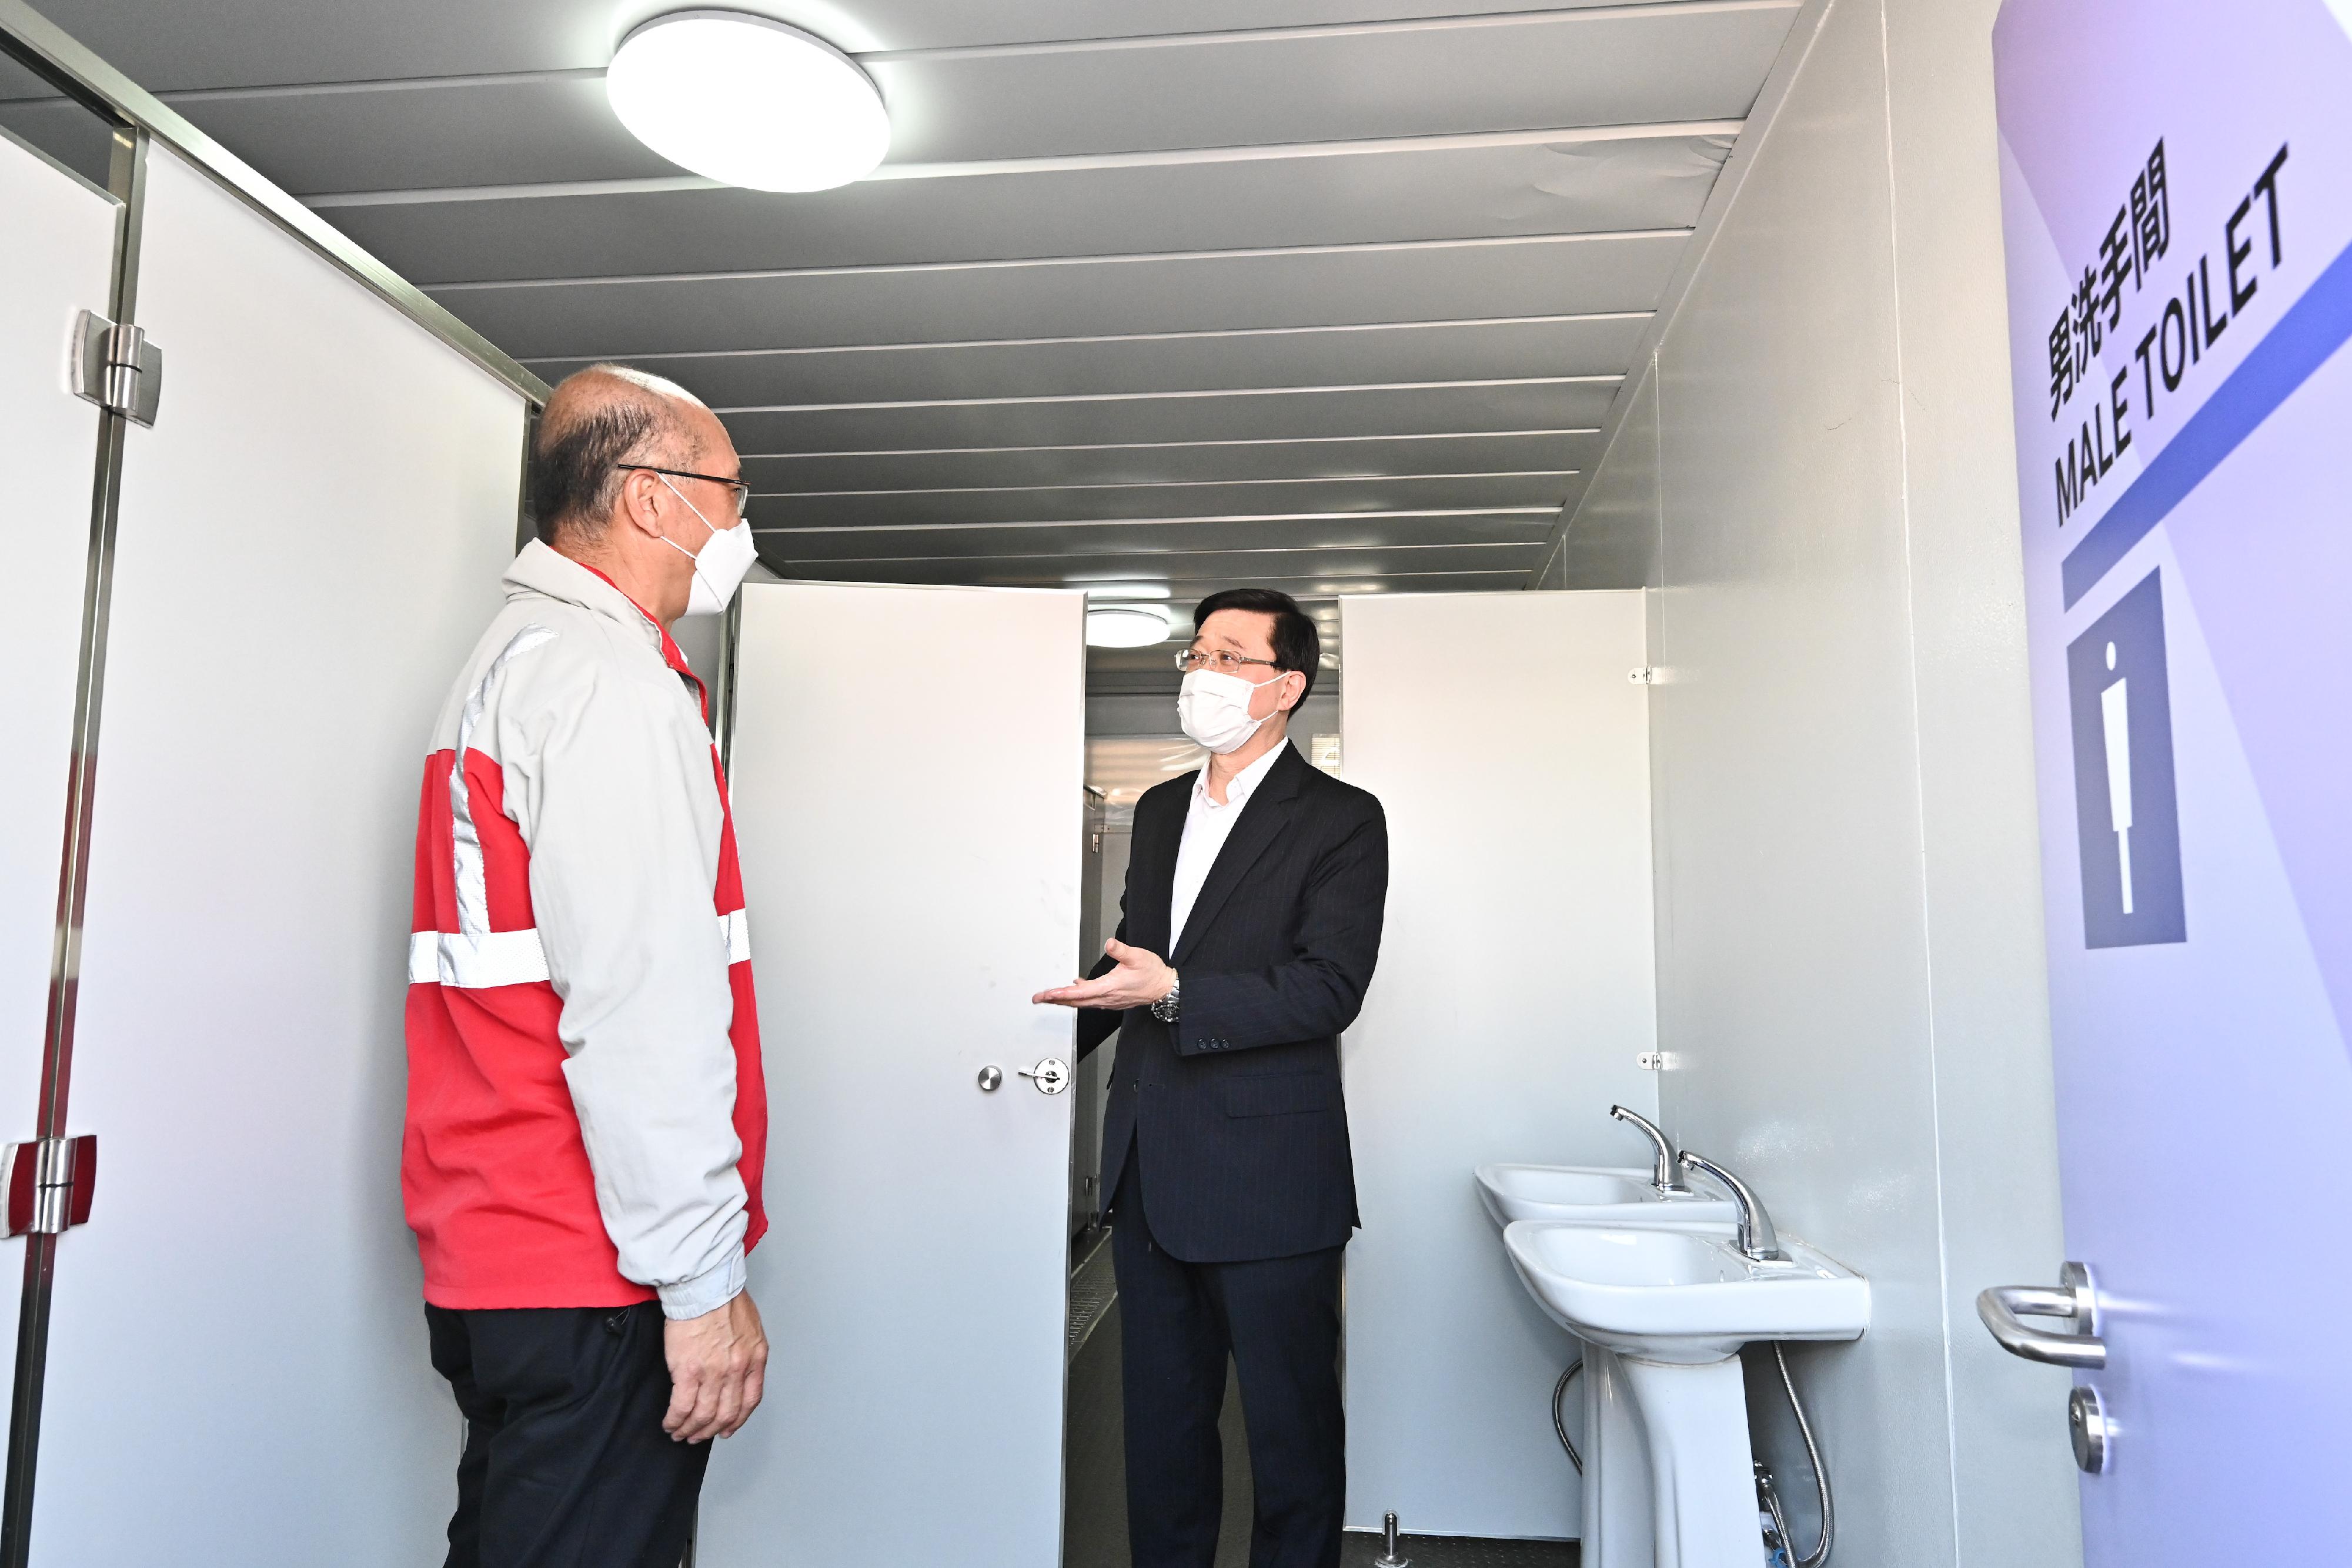 The Chief Secretary for Administration, Mr John Lee, this morning (March 12) visited the third community isolation facility constructed with Mainland support on the Hong Kong Boundary Crossing Facilities Island of the Hong Kong-Zhuhai-Macao Bridge. Photo shows Mr Lee (right), accompanied by a representative of the contractor, viewing the newly constructed facilities.